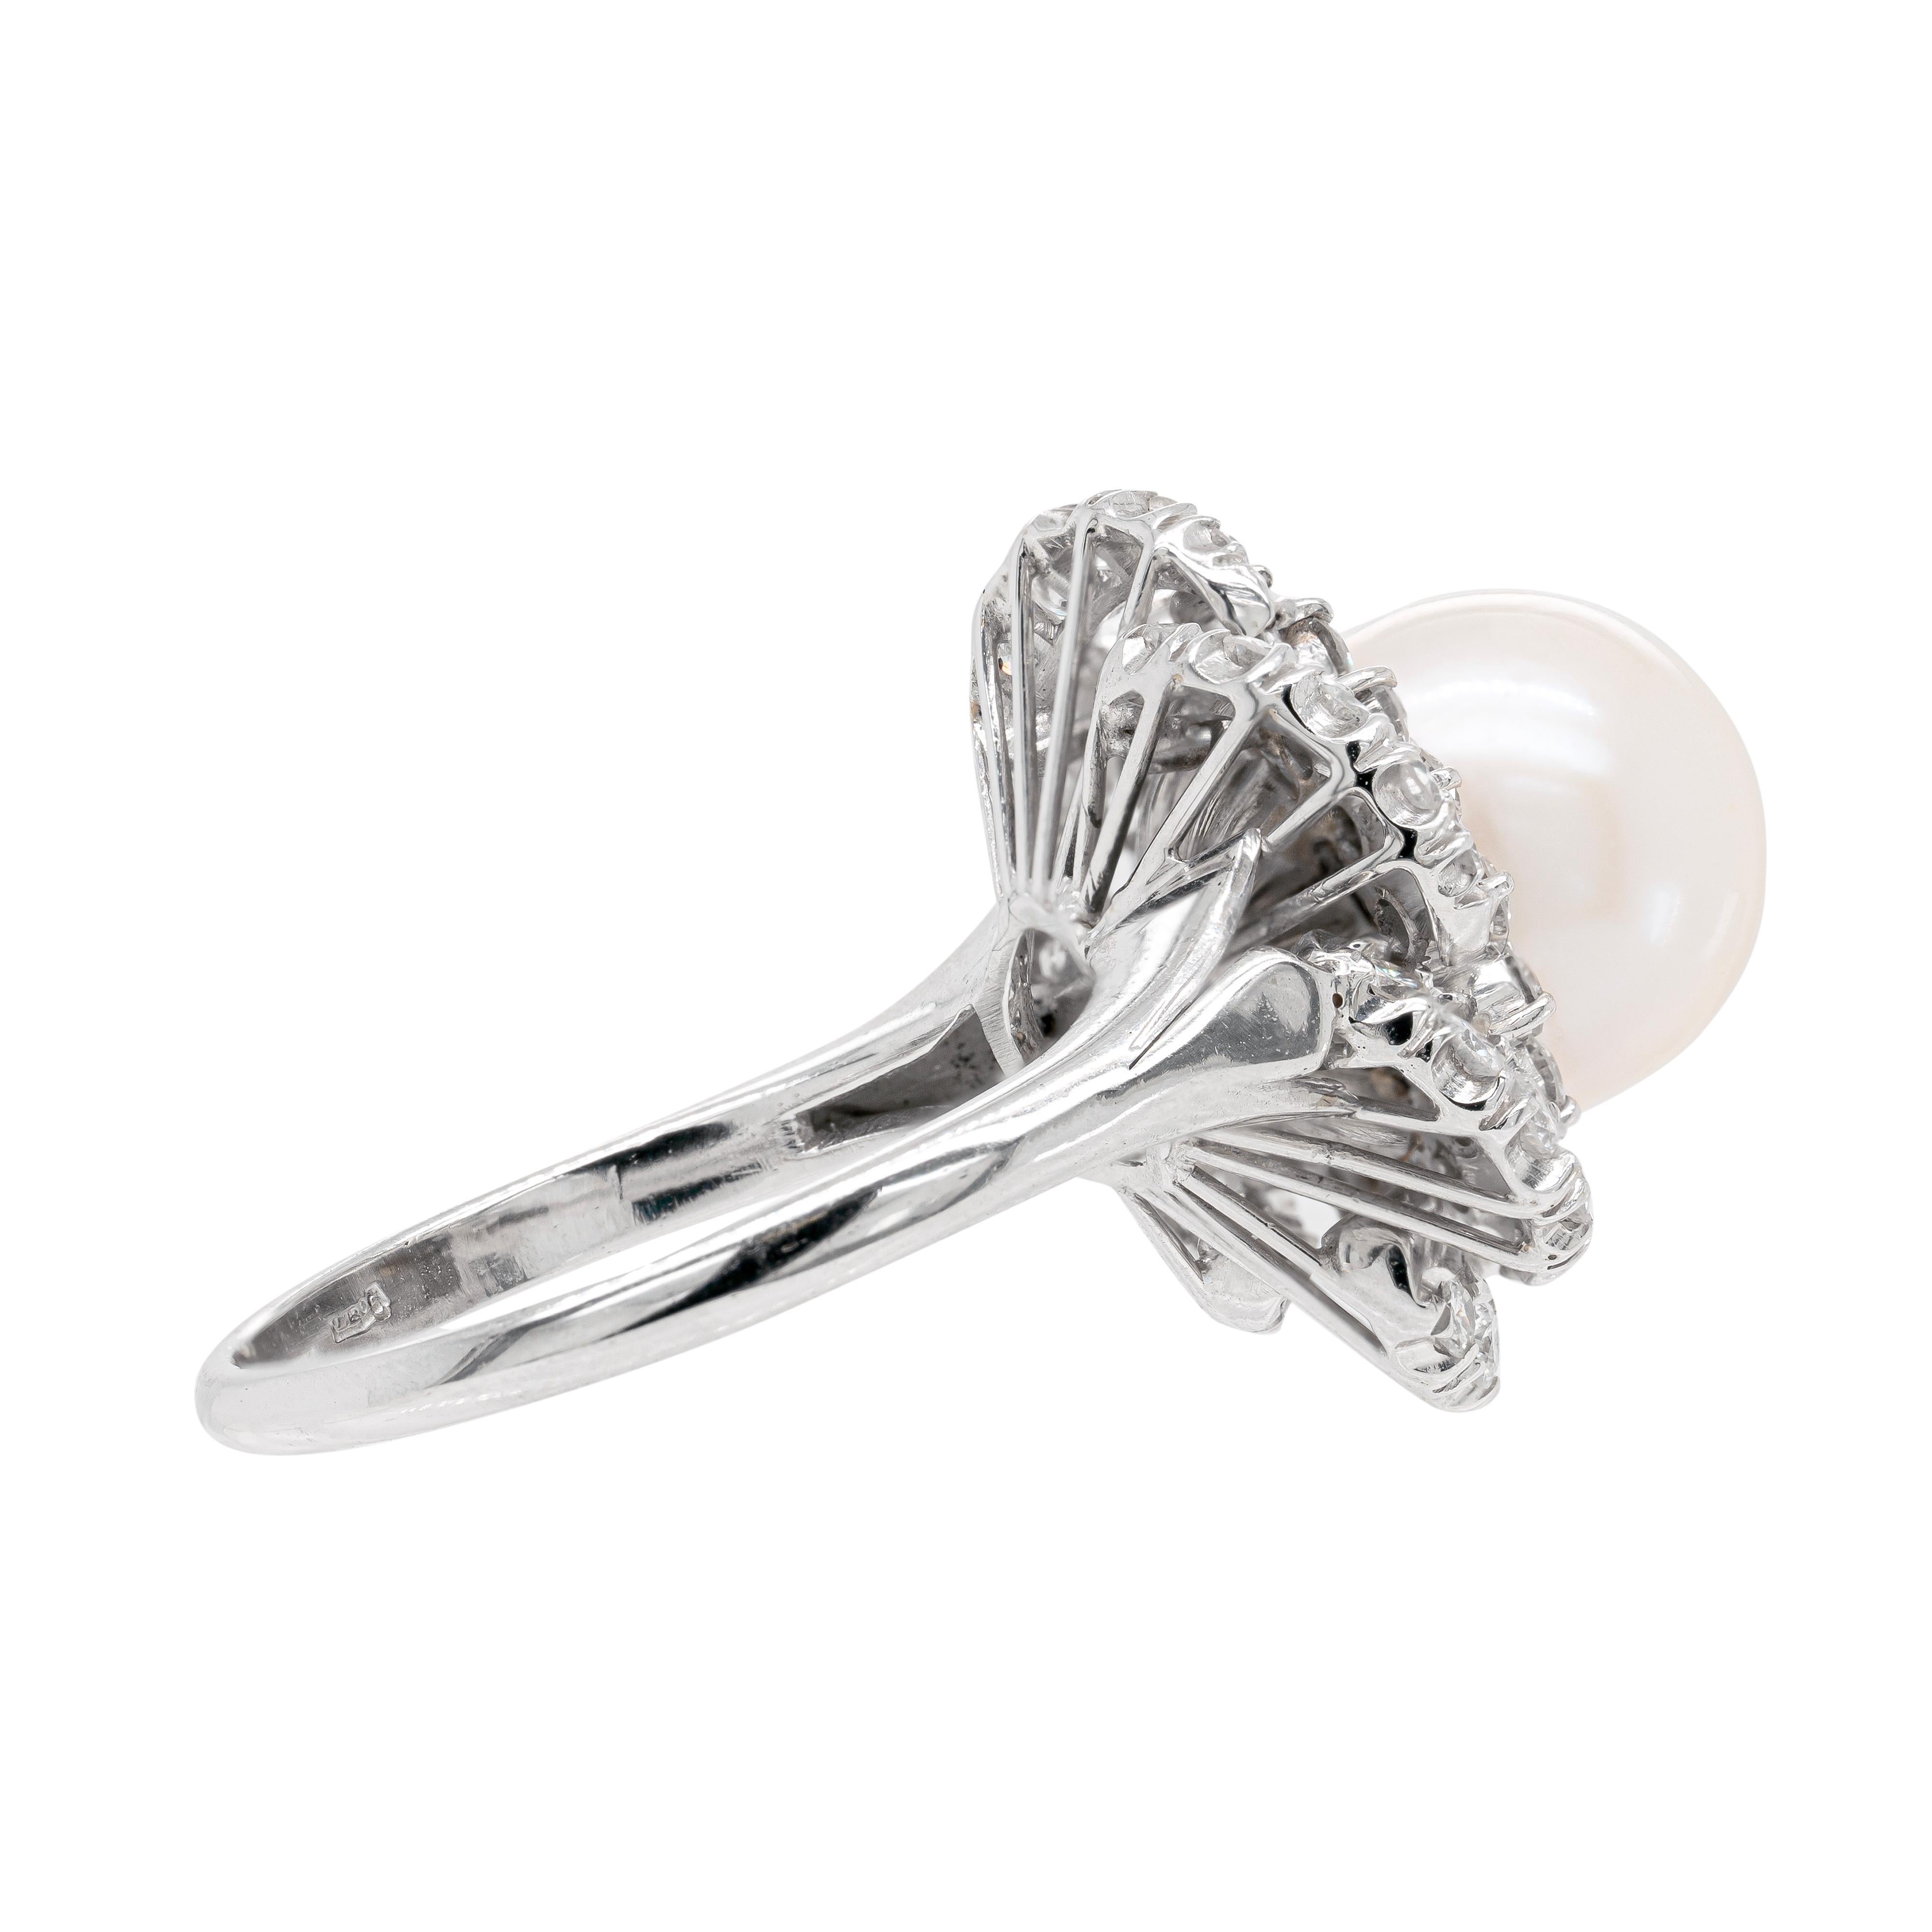 This exquisite 18 carat white gold cluster ring features a gorgeous south sea pearl measuring 10.8mm, beautifully surrounded by 18 fine quality round brilliant cut diamonds. The wonderful ring is further designed with six delicate gold swirls, each